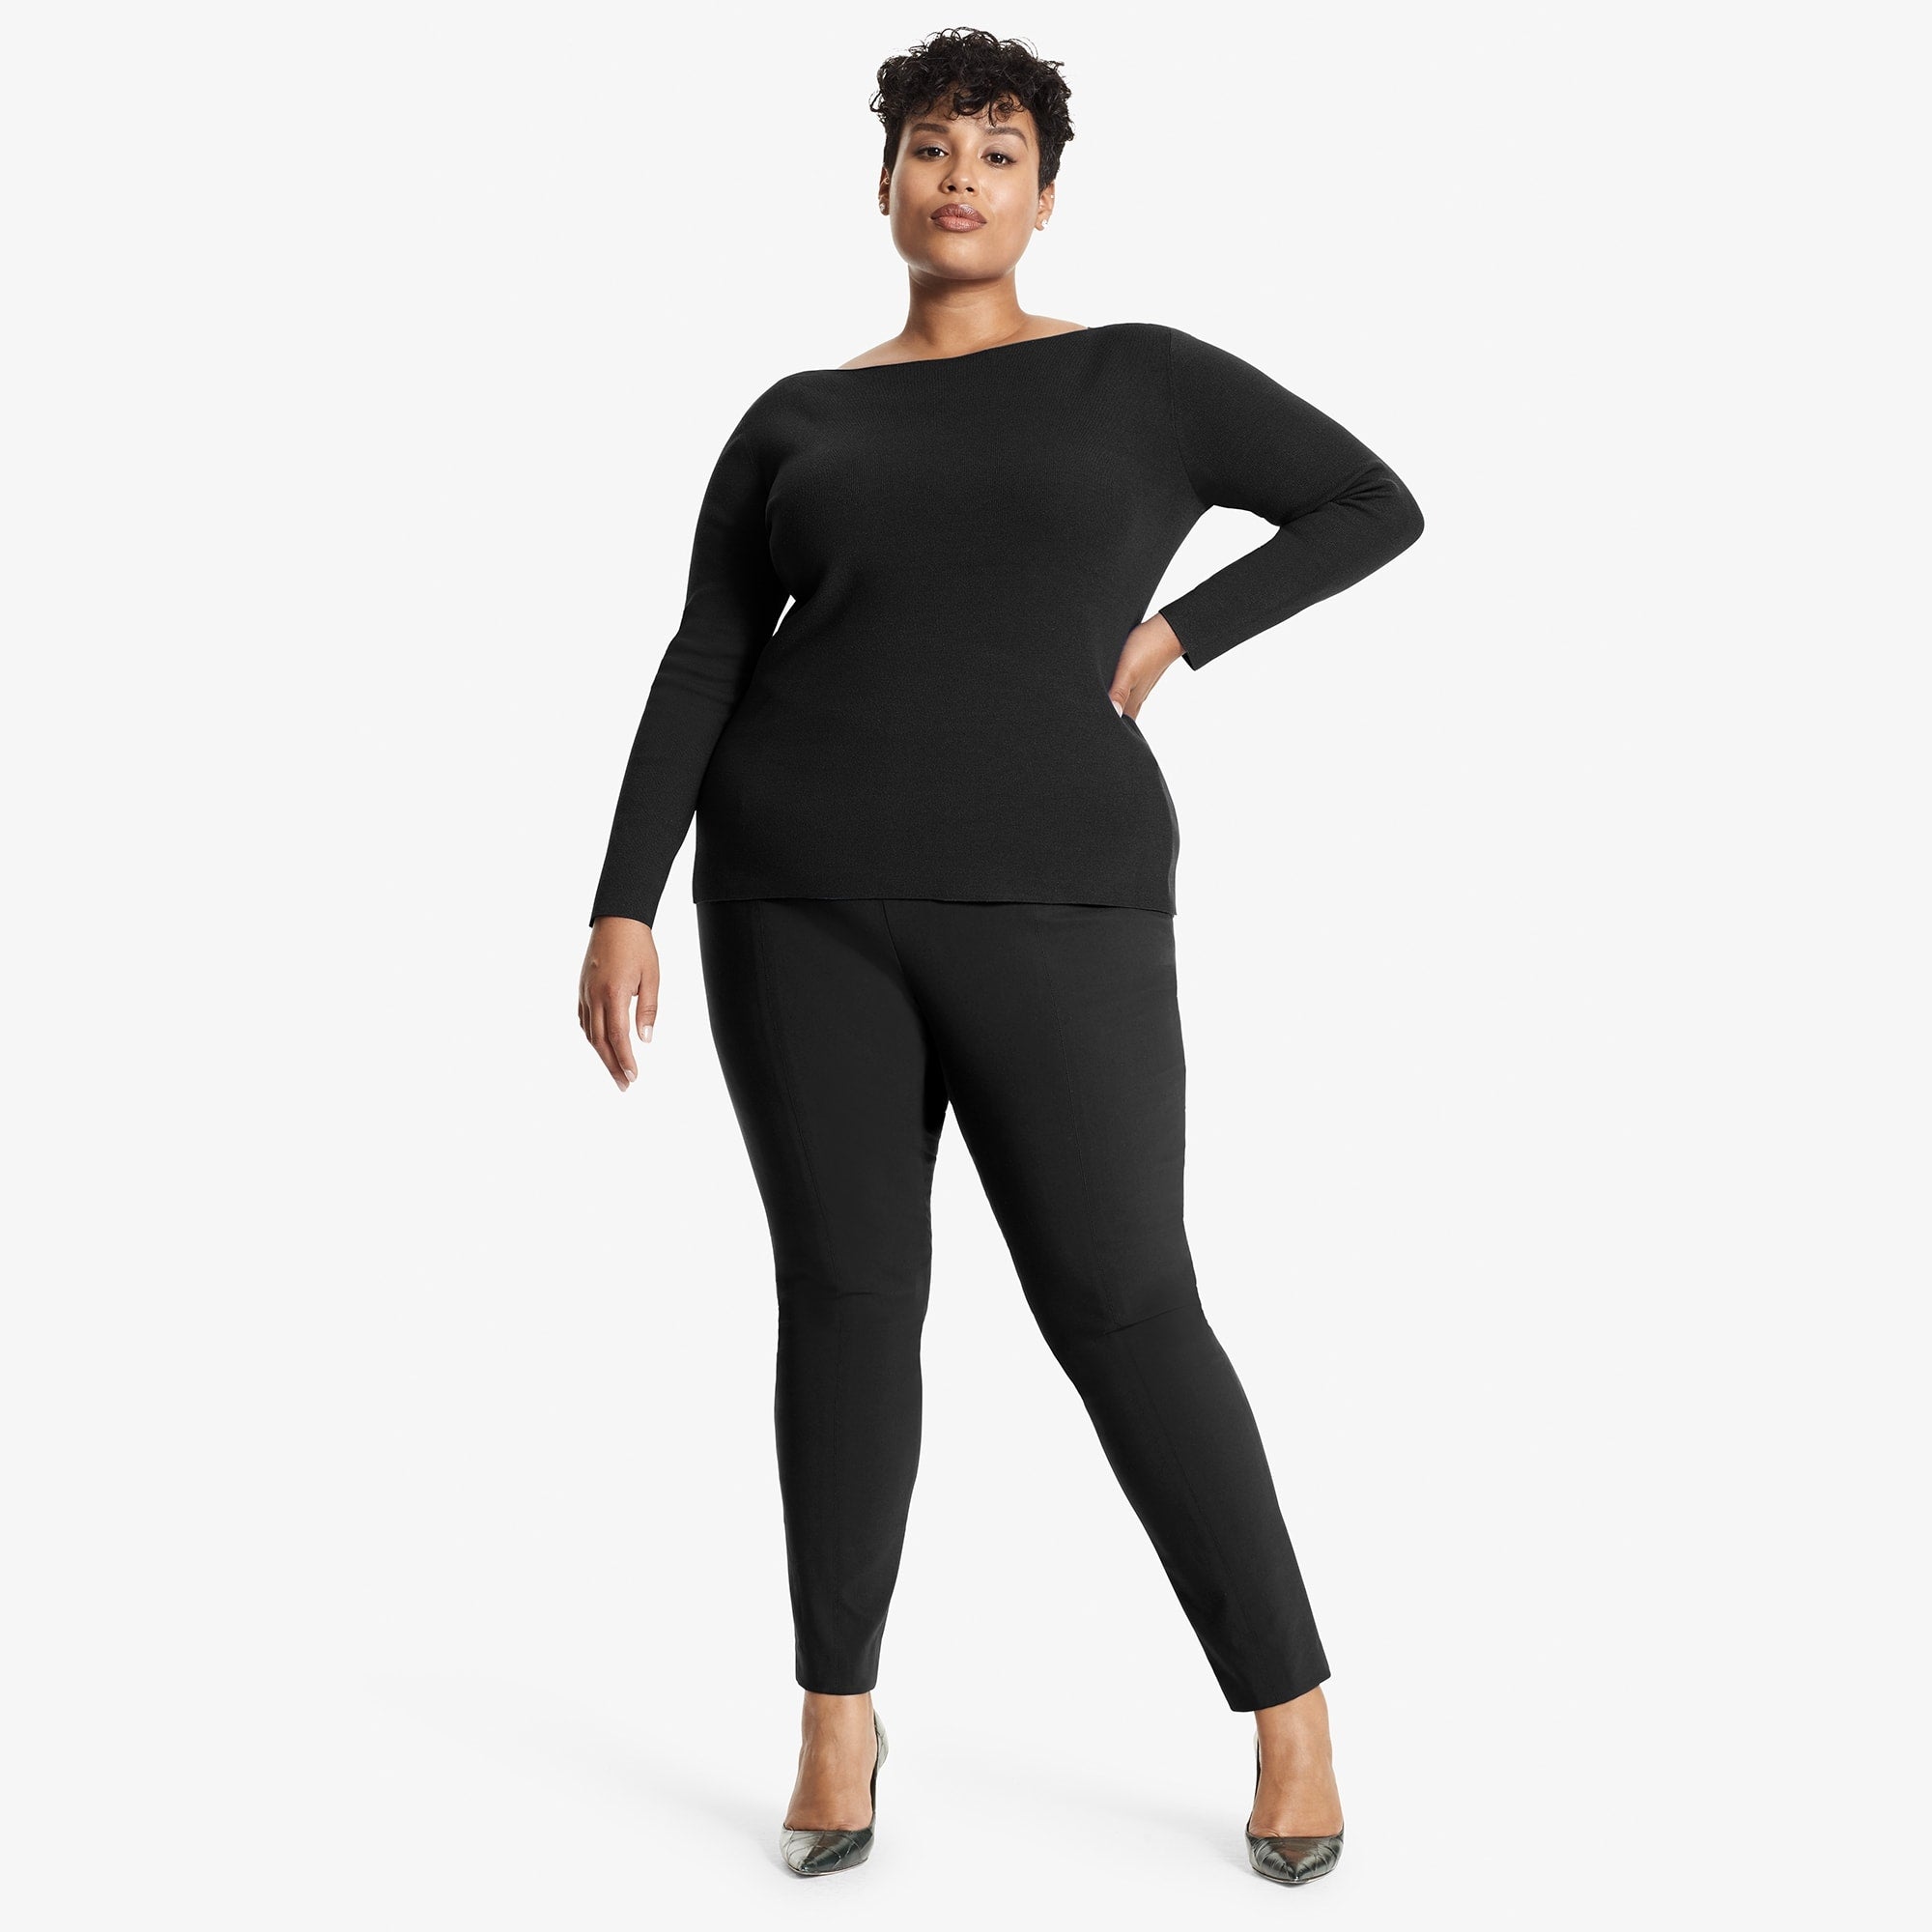 Front image of a woman standing wearing the Celeste Top in Black